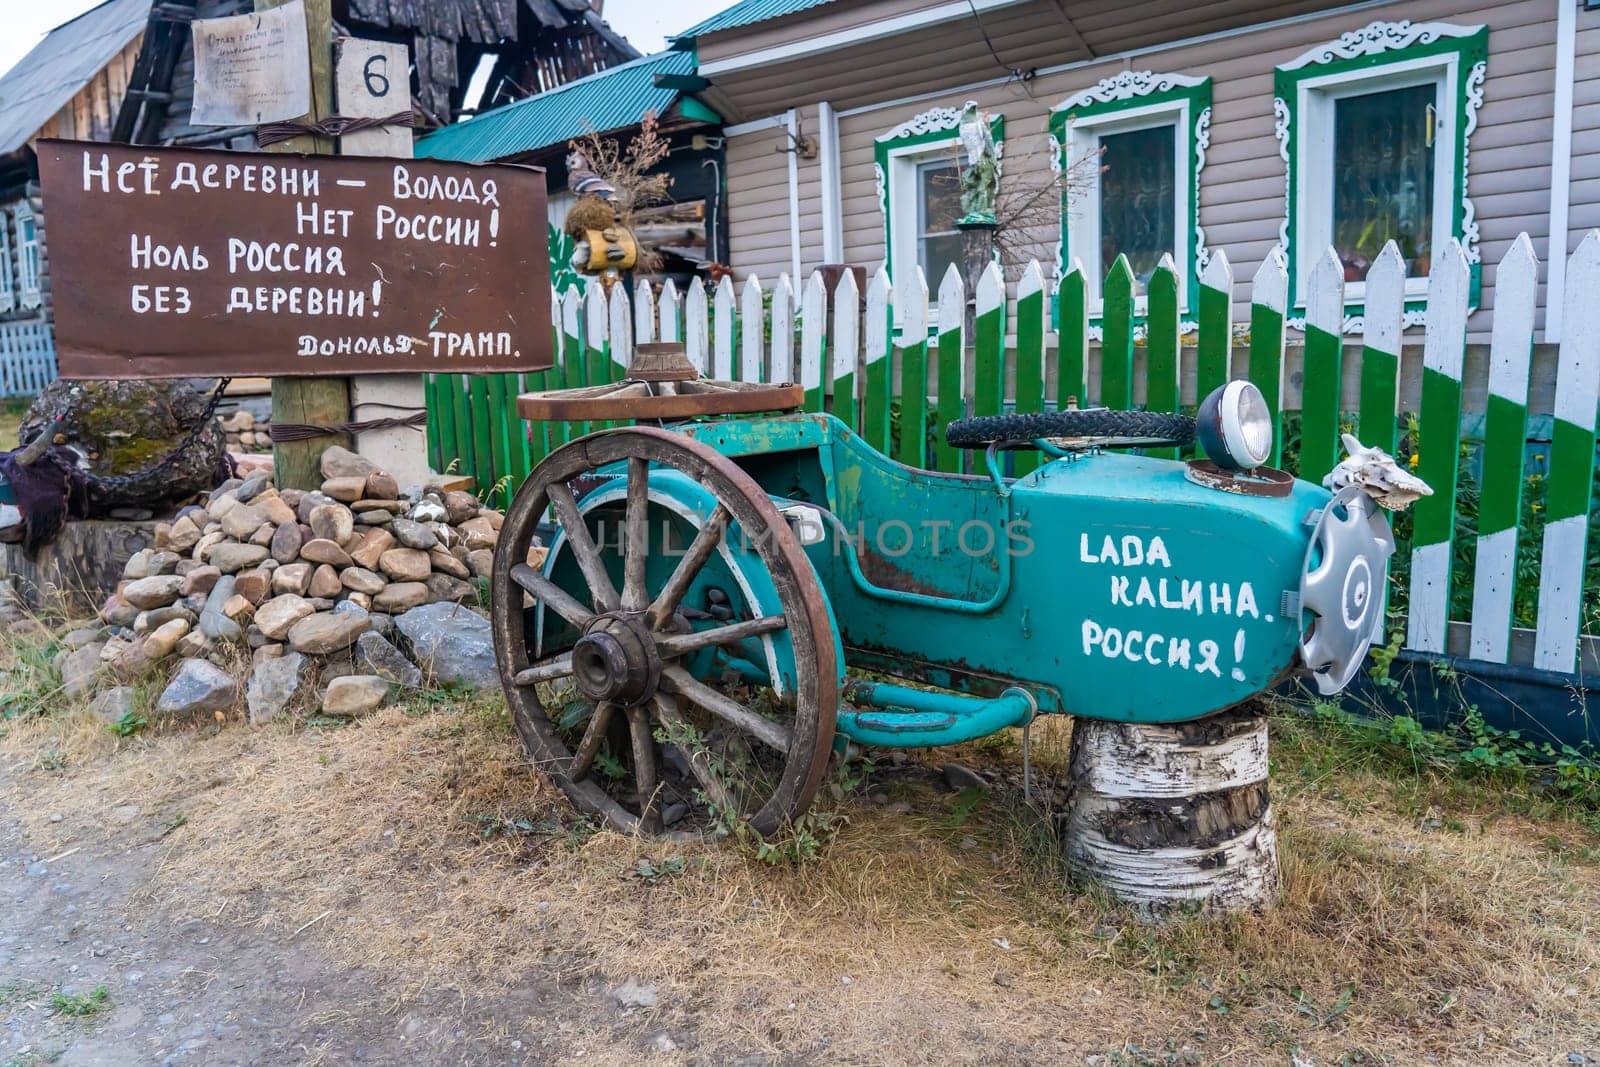 Tyulyuk, Russia - July 22, 2020: Russian funny and humorous inscriptions in the village of Tyulyuk in the South Urals. by DovidPro